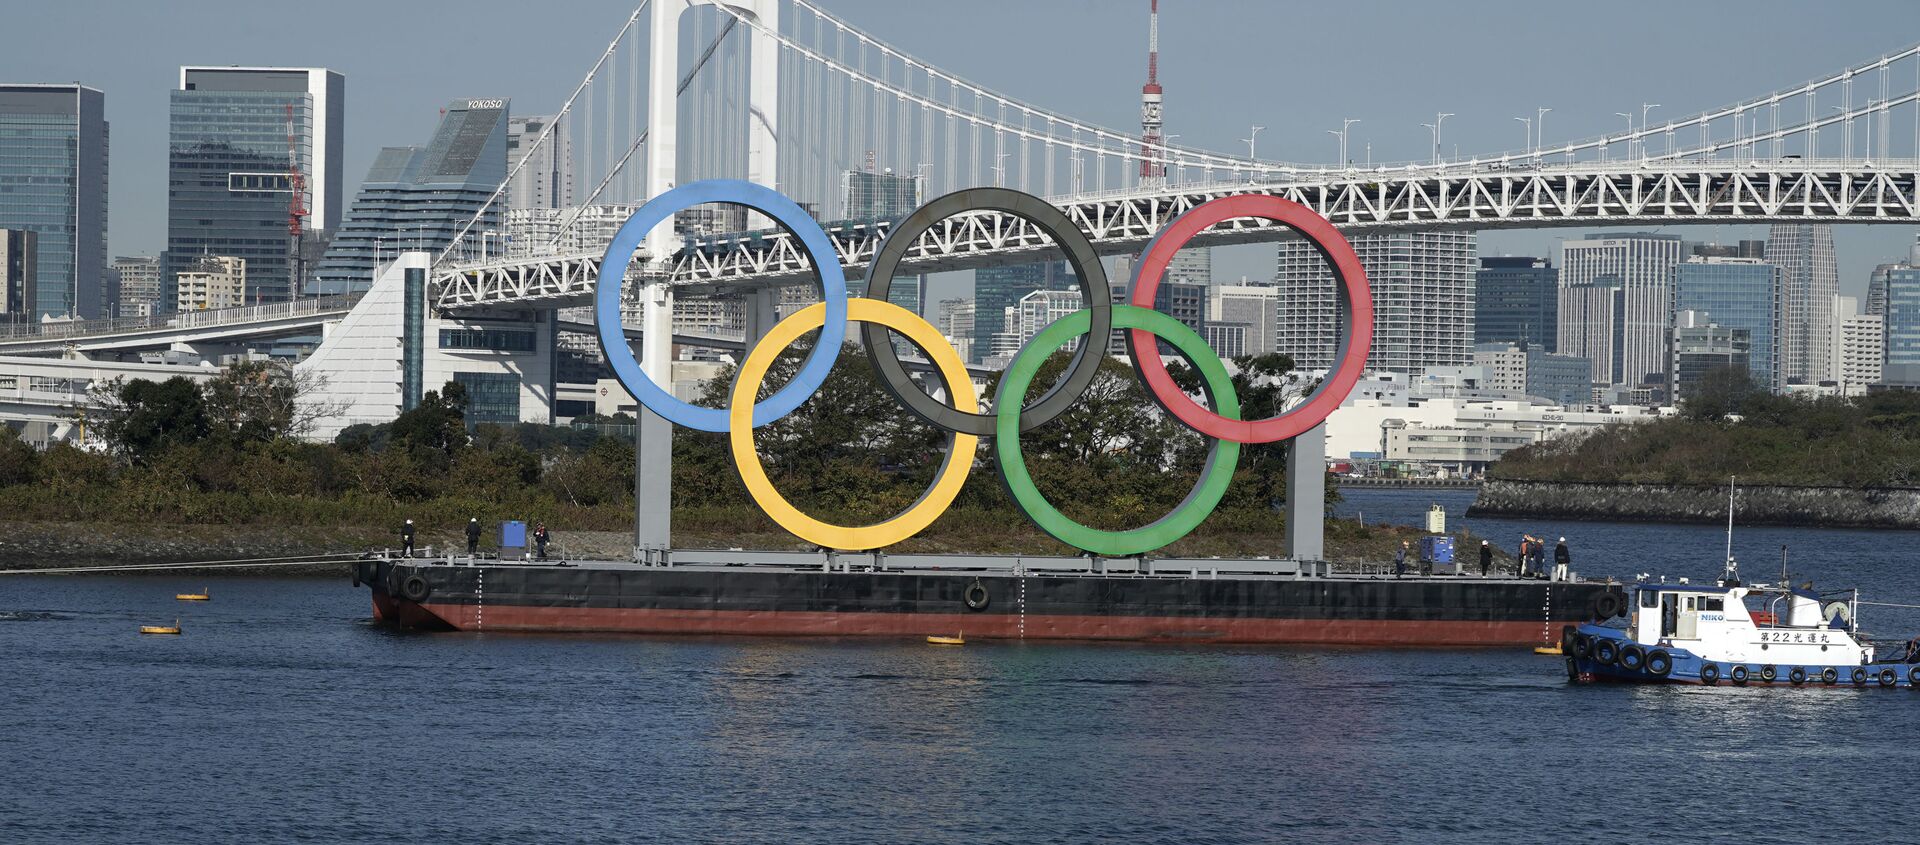 The Olympic Symbol is reinstalled after it was taken down for maintenance ahead of the postponed Tokyo 2020 Olympics in the Odaiba section Tuesday, Dec. 1, 2020, in Tokyo. - Sputnik International, 1920, 21.03.2021